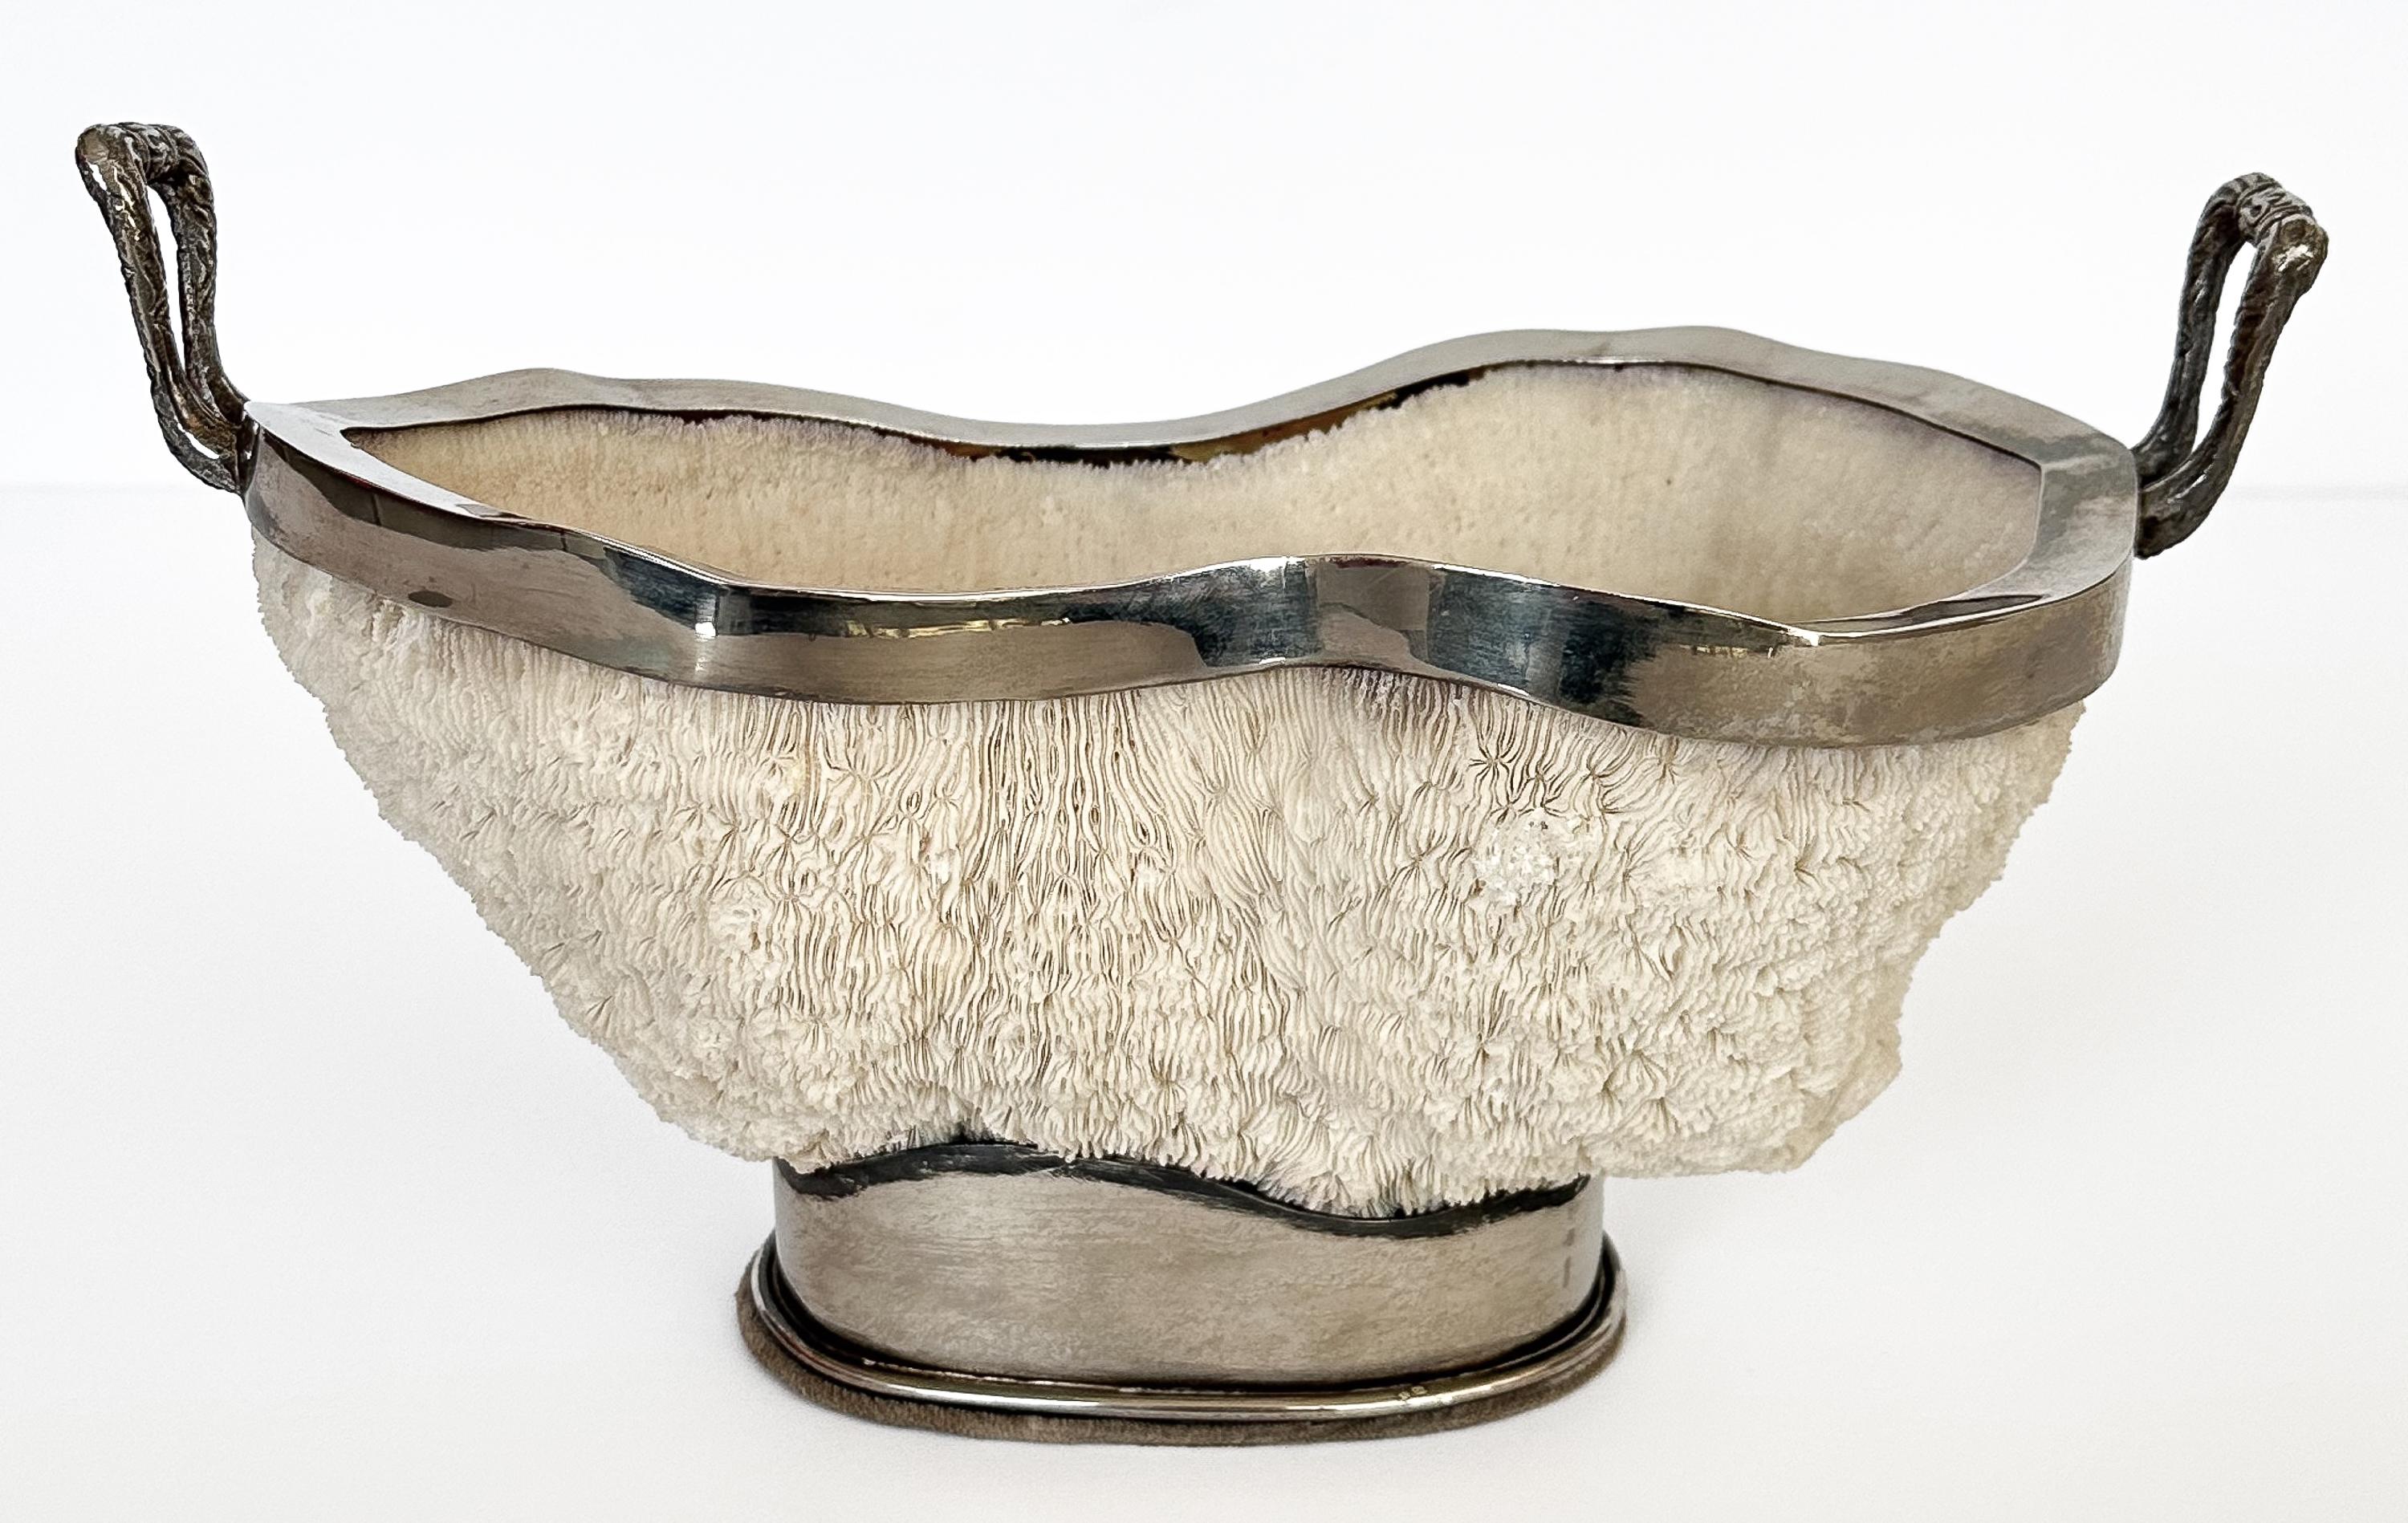 An exquisite bowl  in natural coral and silver by Gabriella Binazzi, Italy circa 1970s. This piece perfectly embodies Binazzi's signature style, which marries the wonders of the natural world with the sophistication of fine design.

The bowl's focal